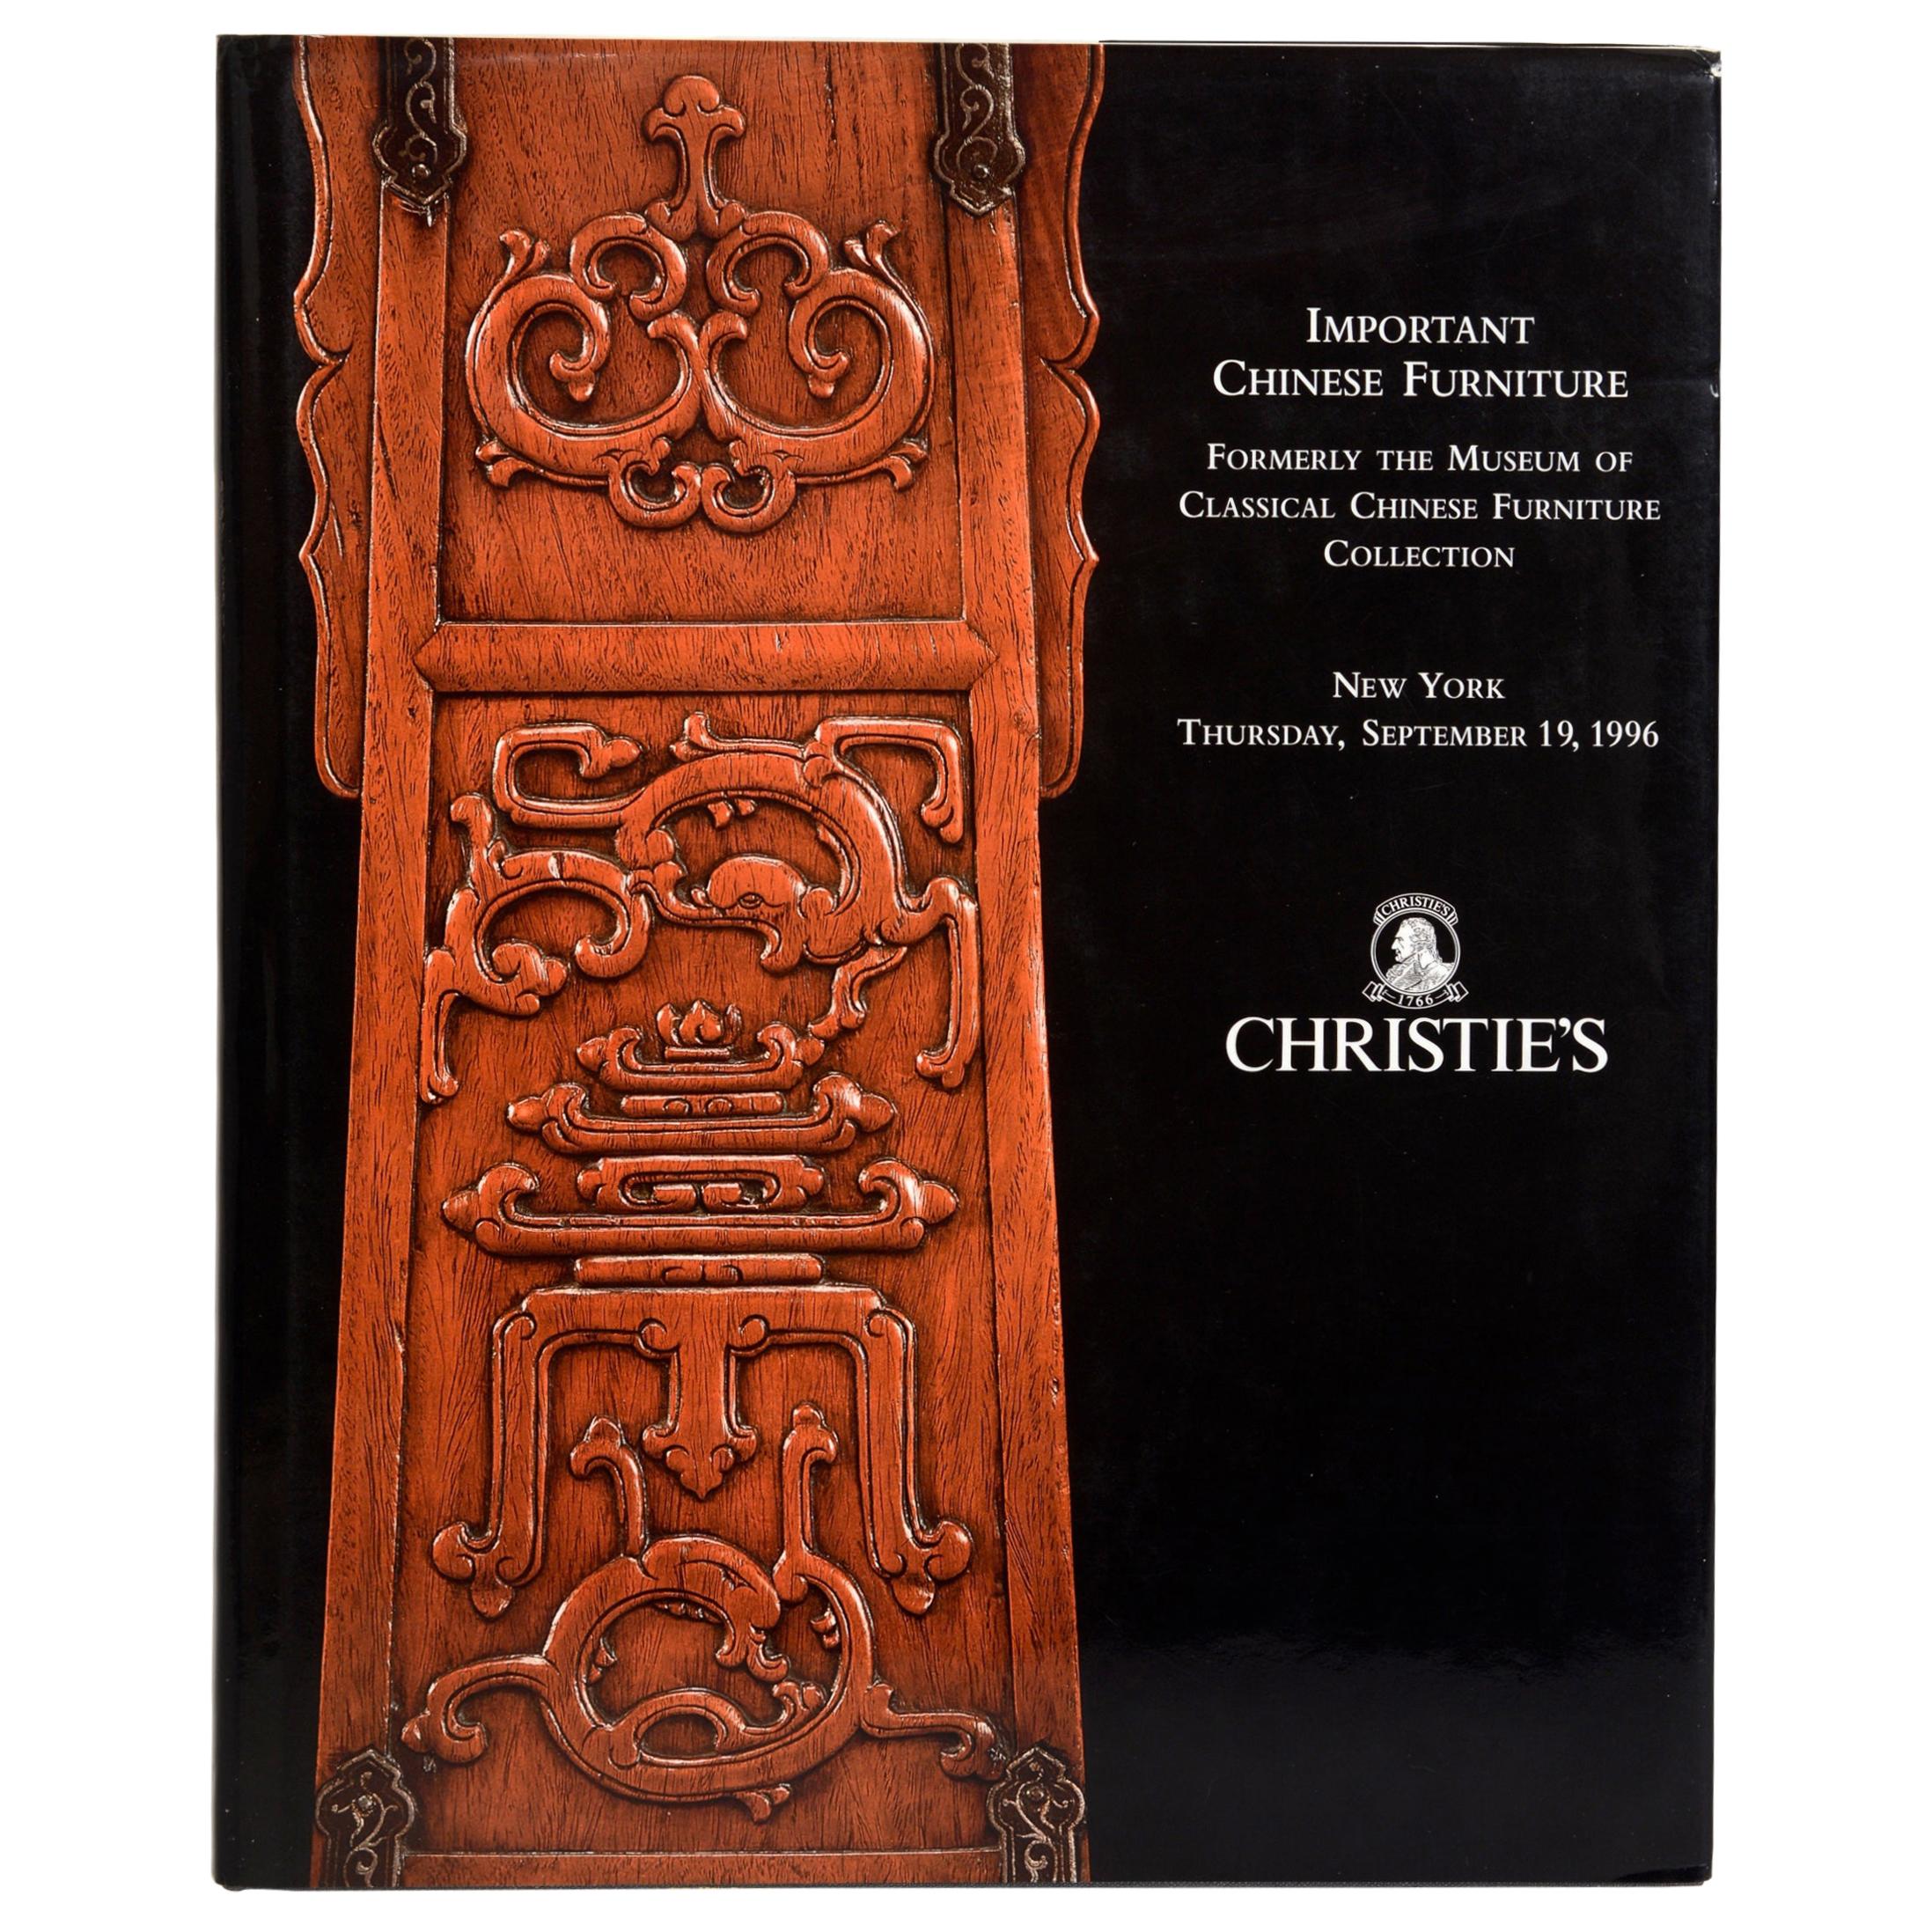 Important Chinese Furniture, Formerly the Museum of Classical Chinese Furniture